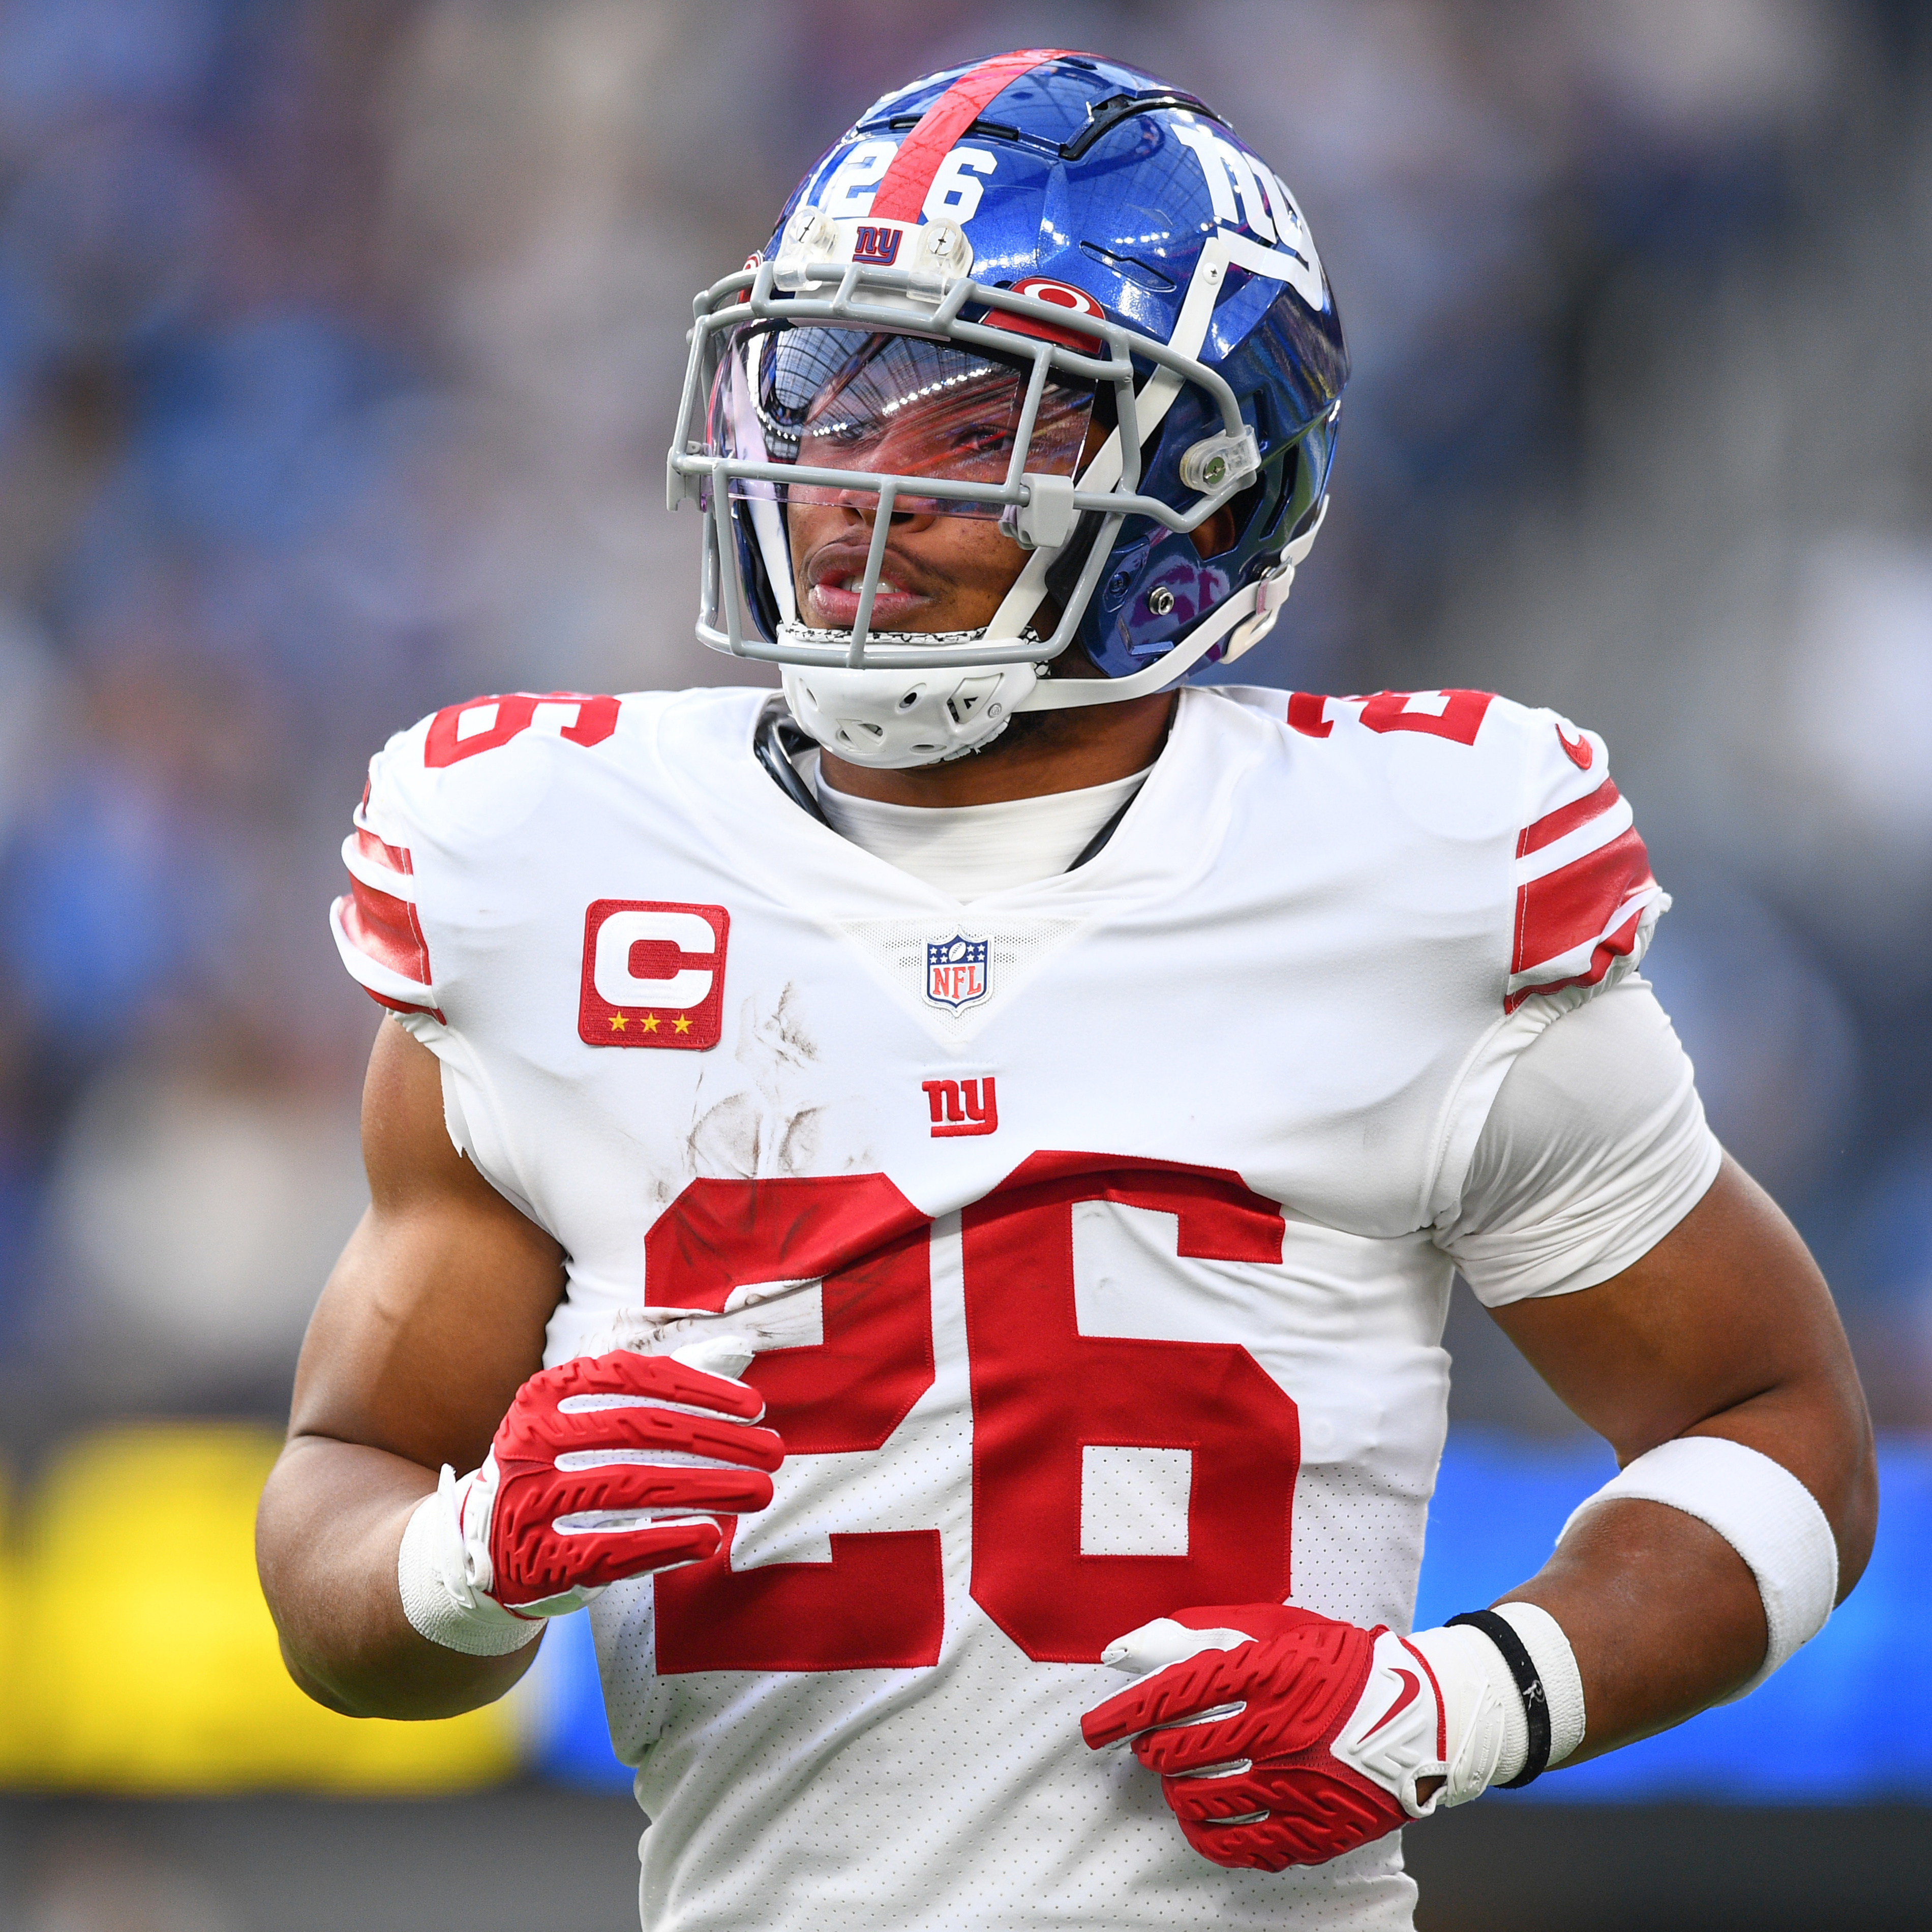 Giants' Saquon Barkley: 'I Feel Like I Can Trust My Knee Again' After Injuries